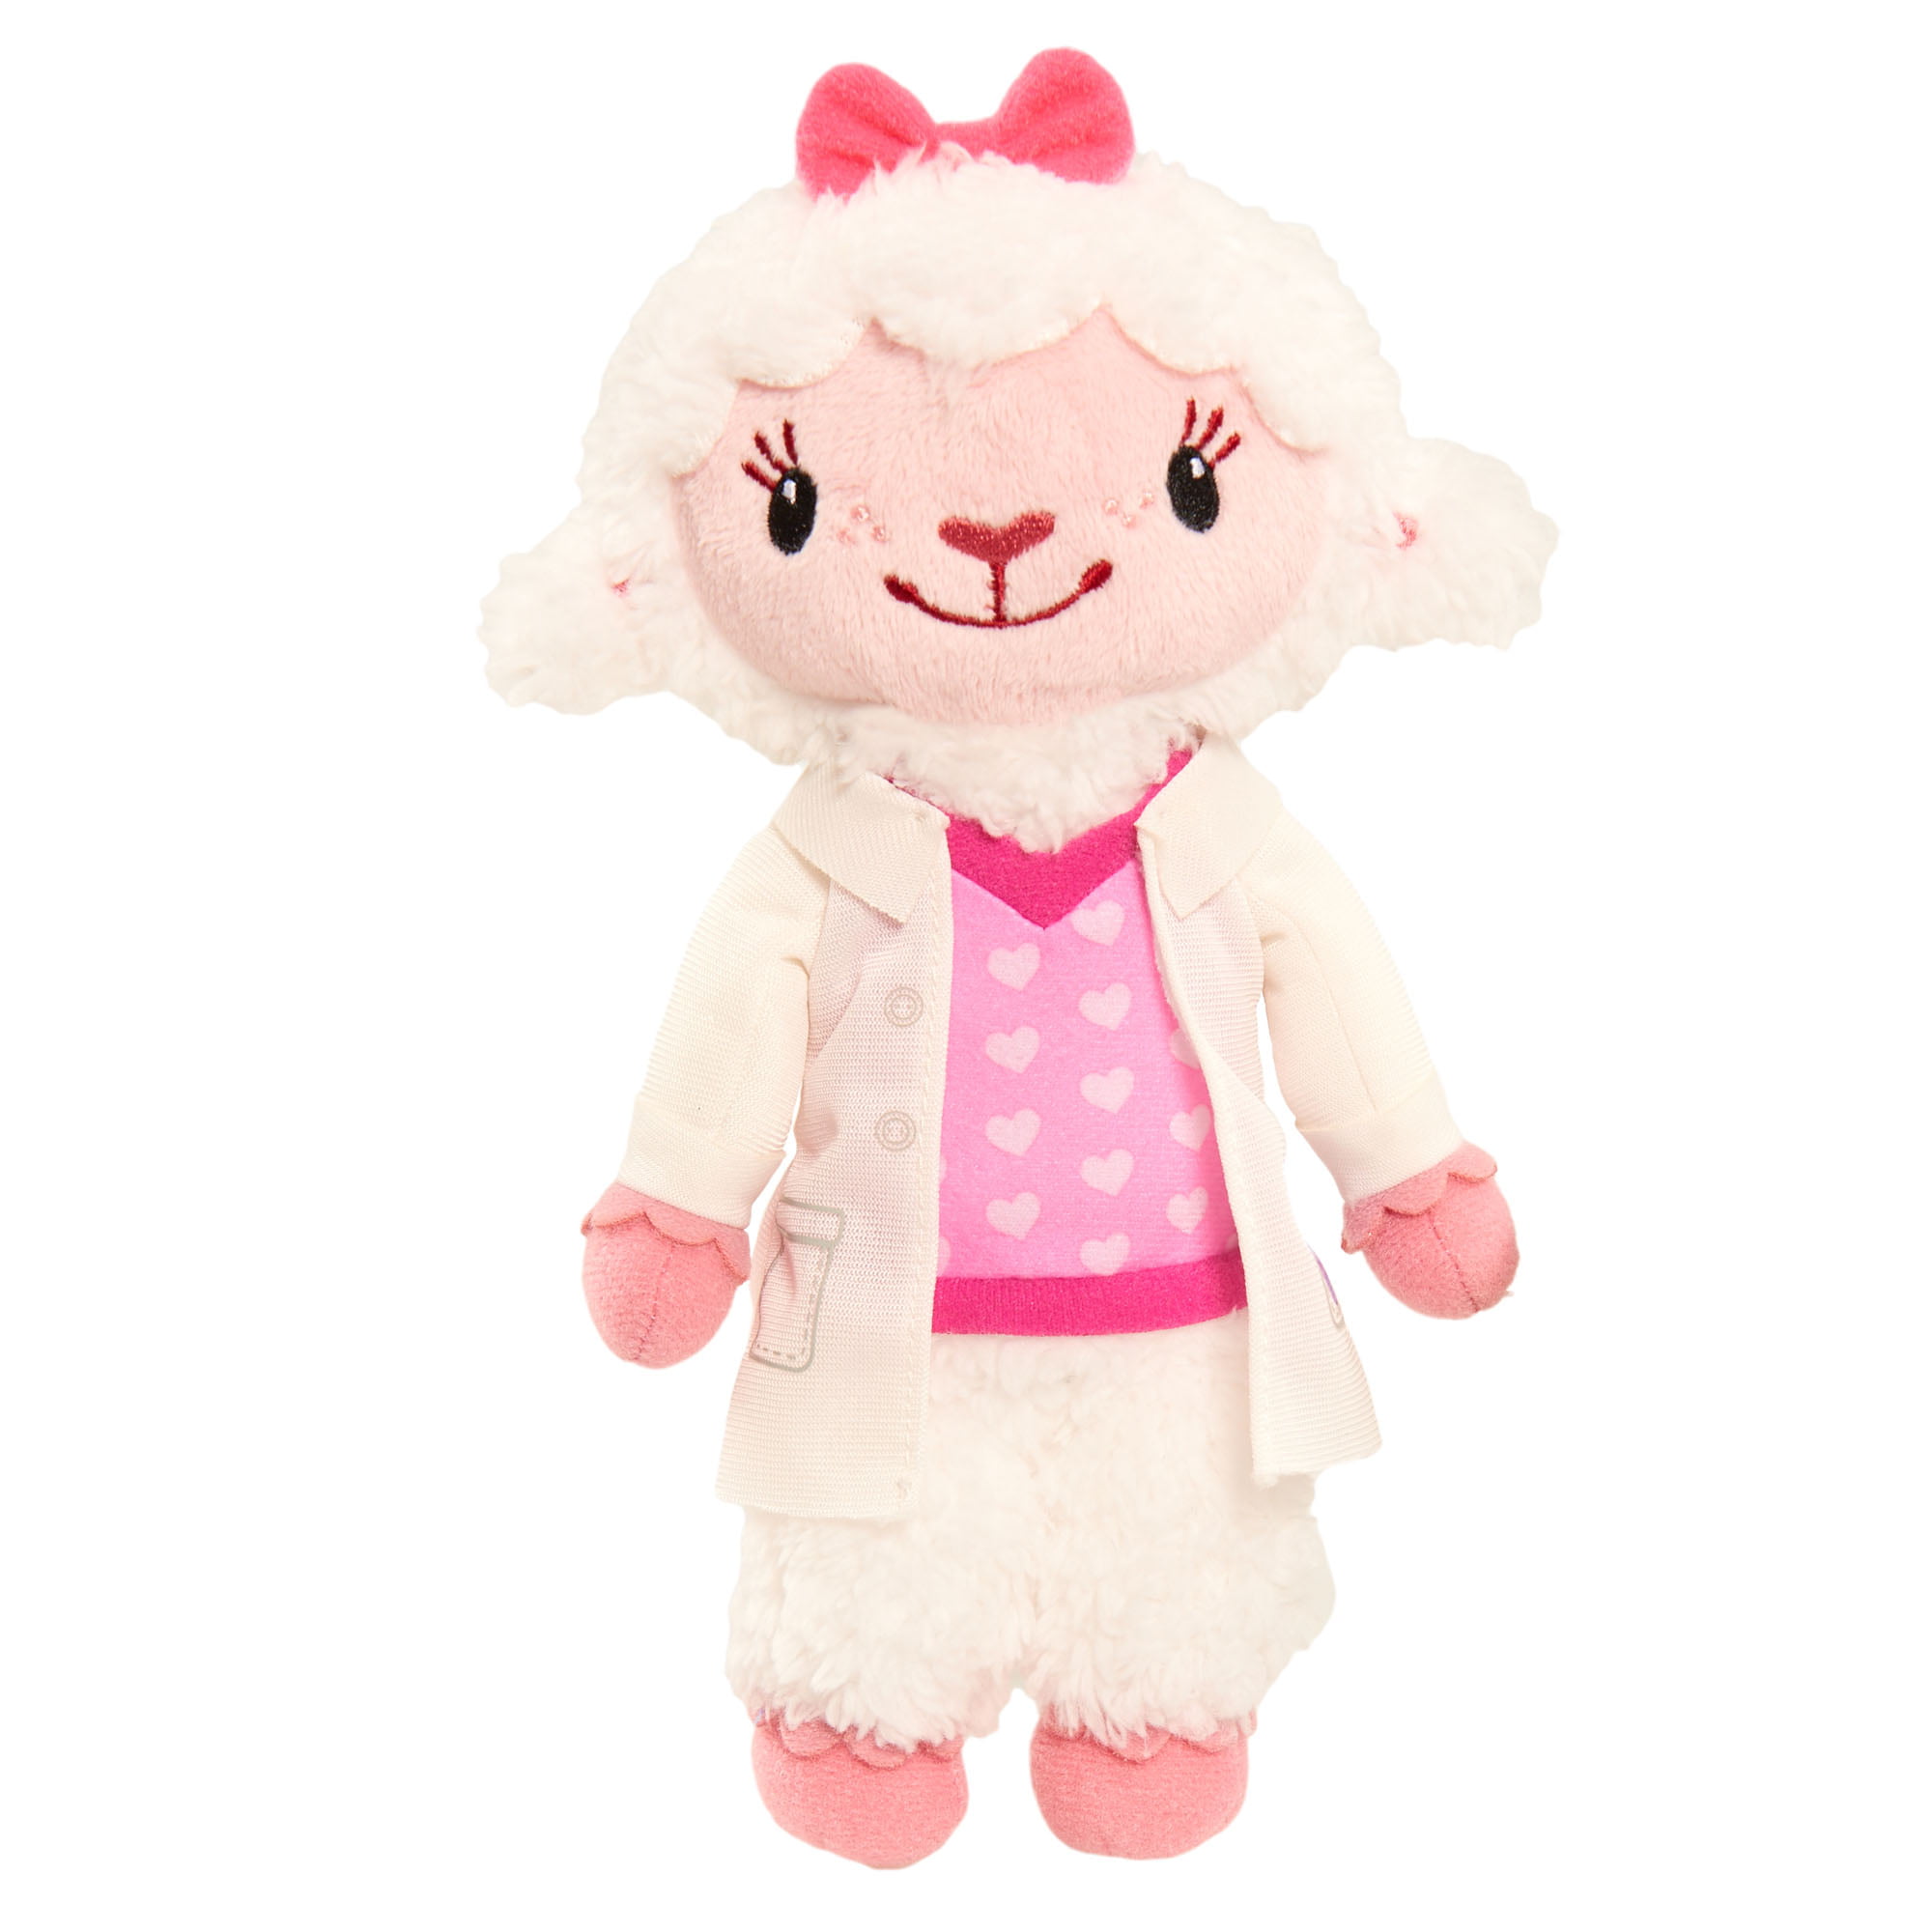 NEW OFFICIAL 12" DOC MCSTUFFINS PLUSH SOFT TOYS HALLIE LAMBIE STUFFY CHILLY DOC 